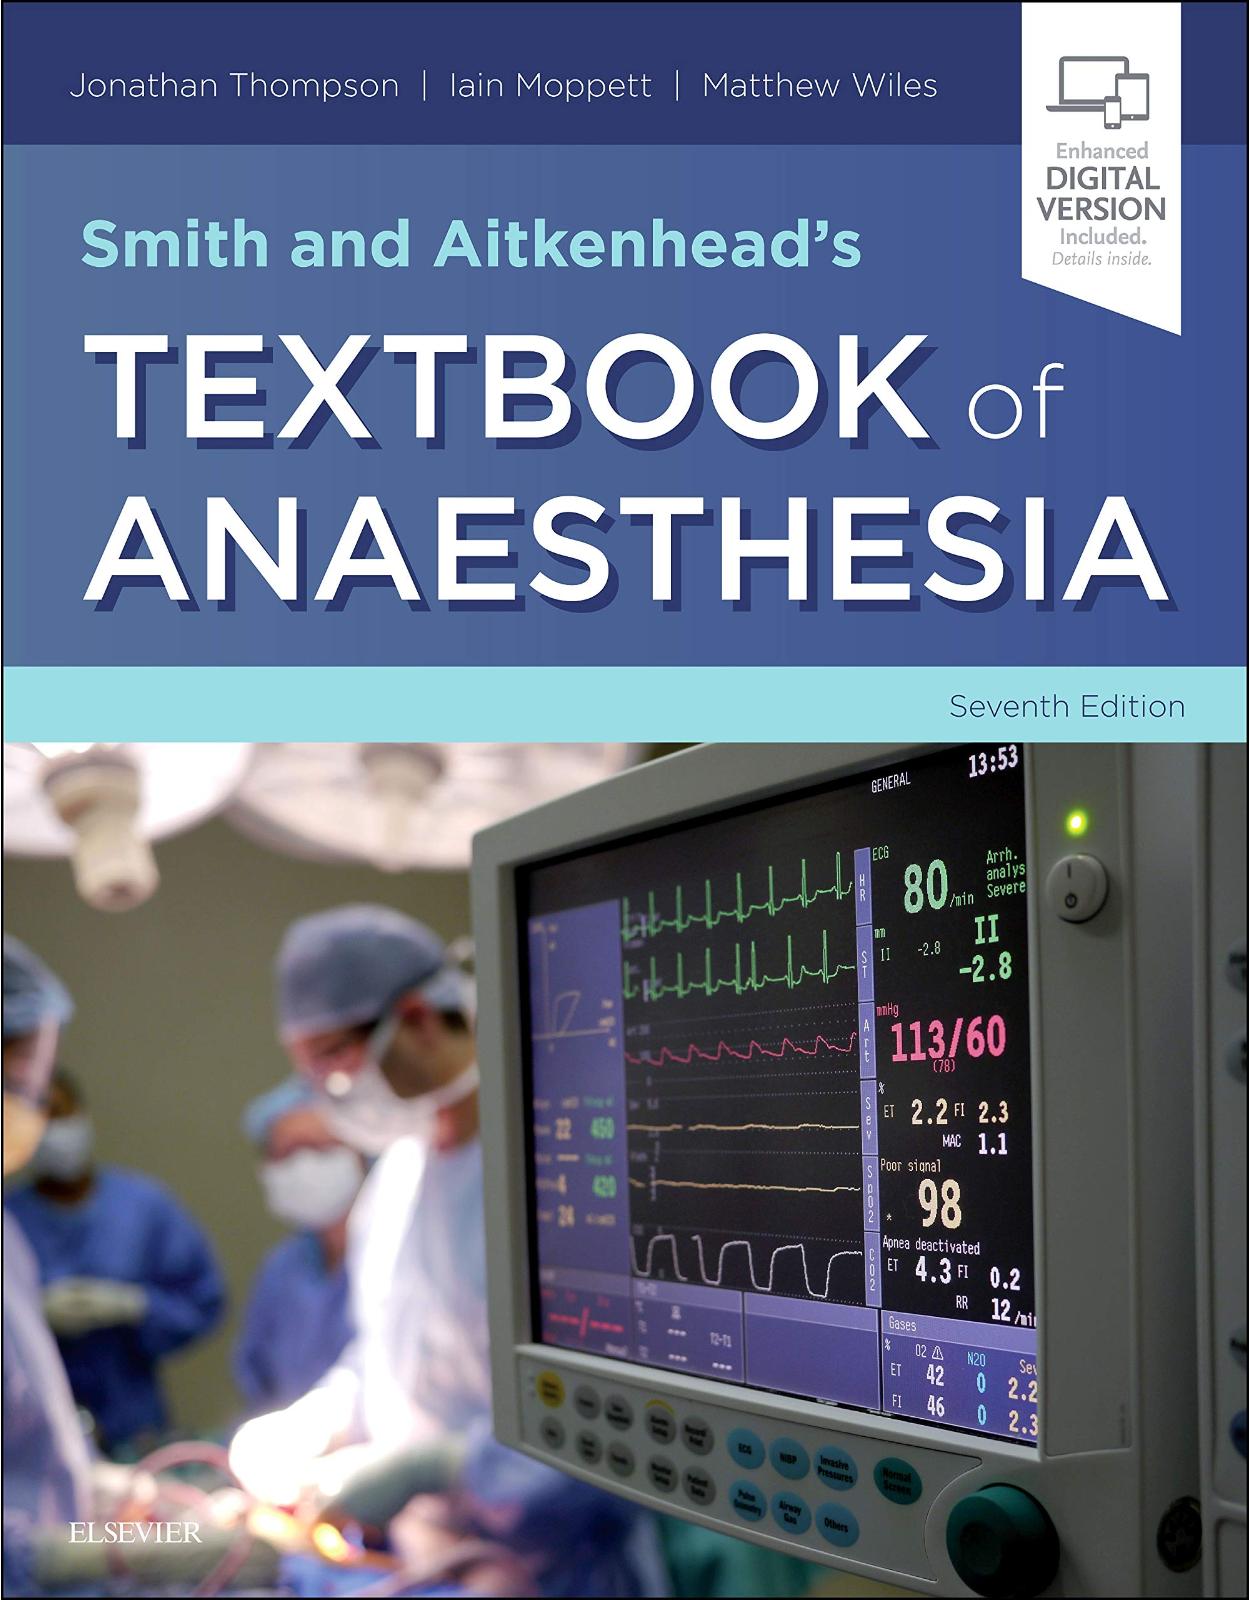 Smith and Aitkenhead's Textbook of Anaesthesia, 7e: Expert Consult - Online & Print